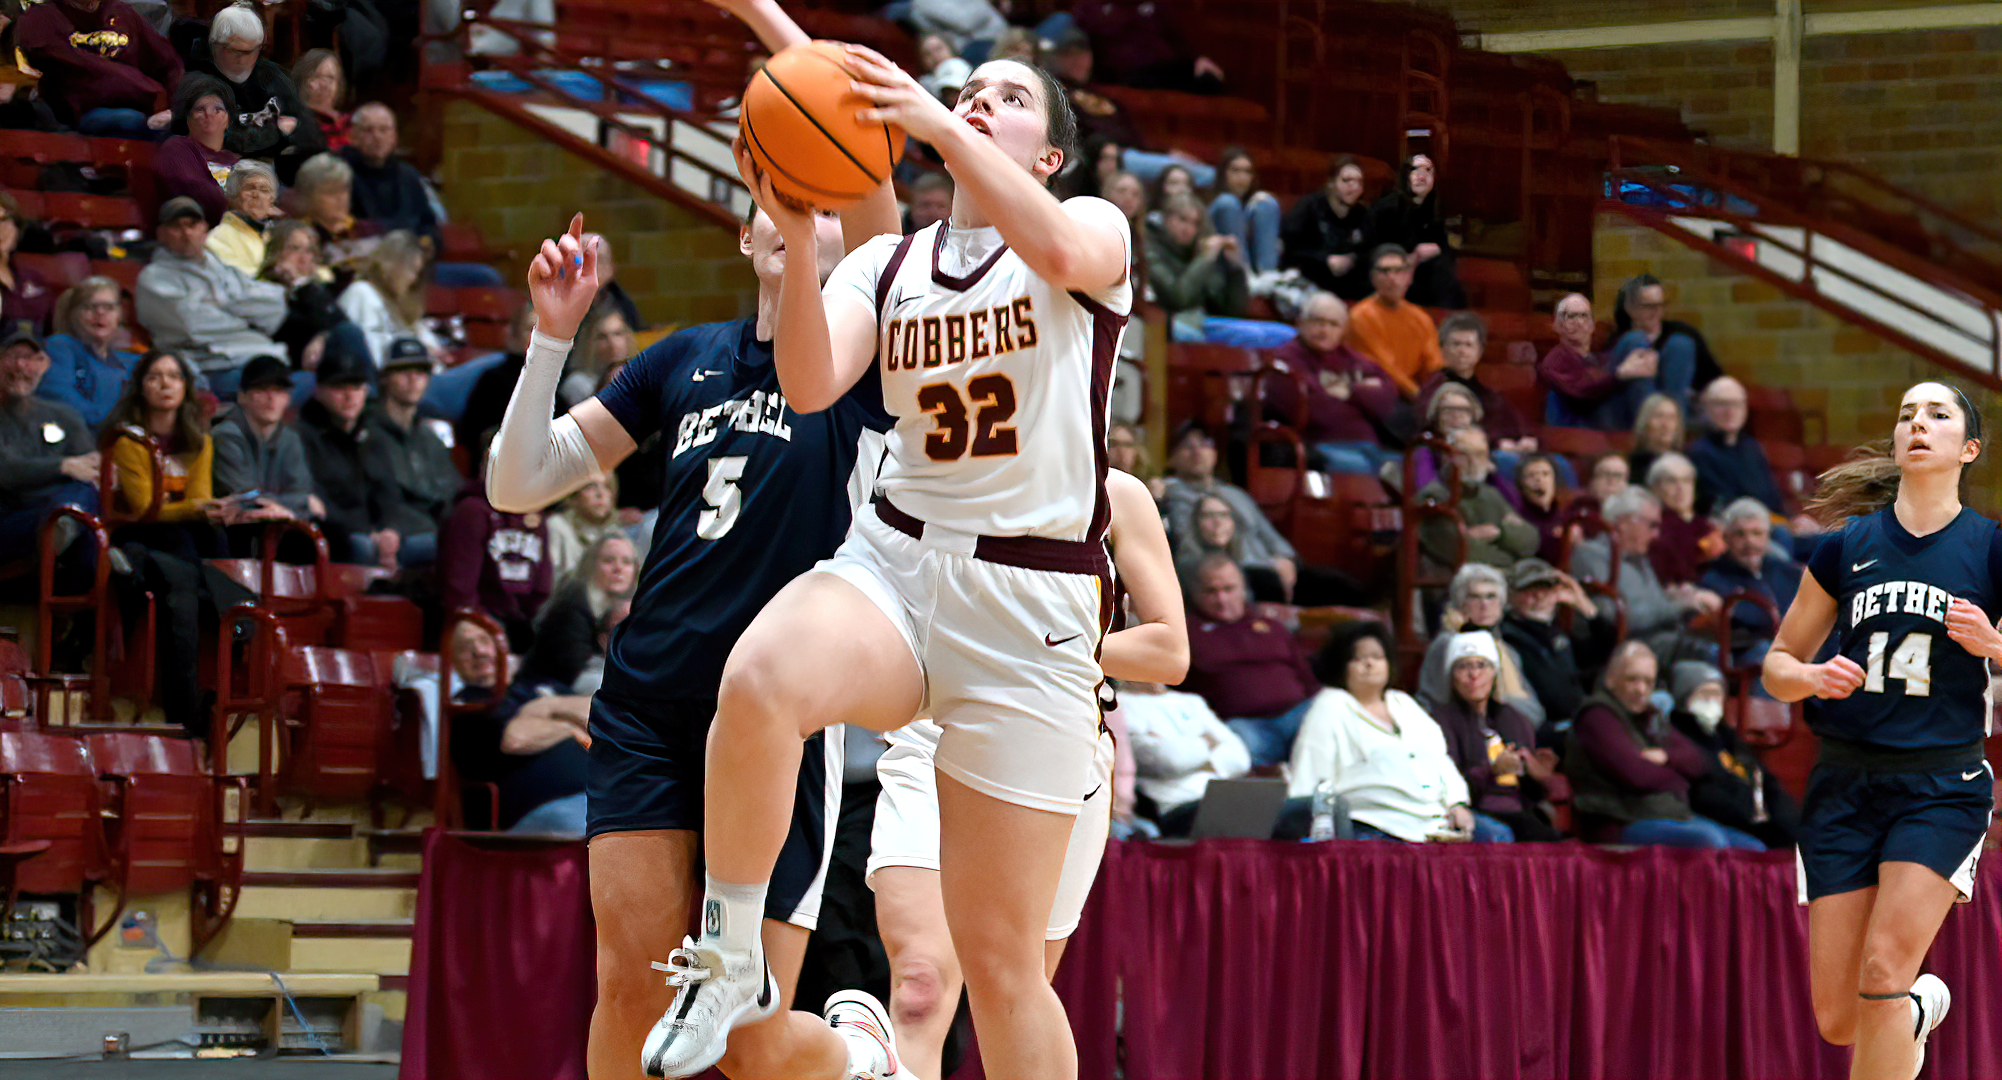 Greta Tollefson goes up for the layup in the second half of the Cobbers' game with Bethel. She finished with 10 points and five rebounds.